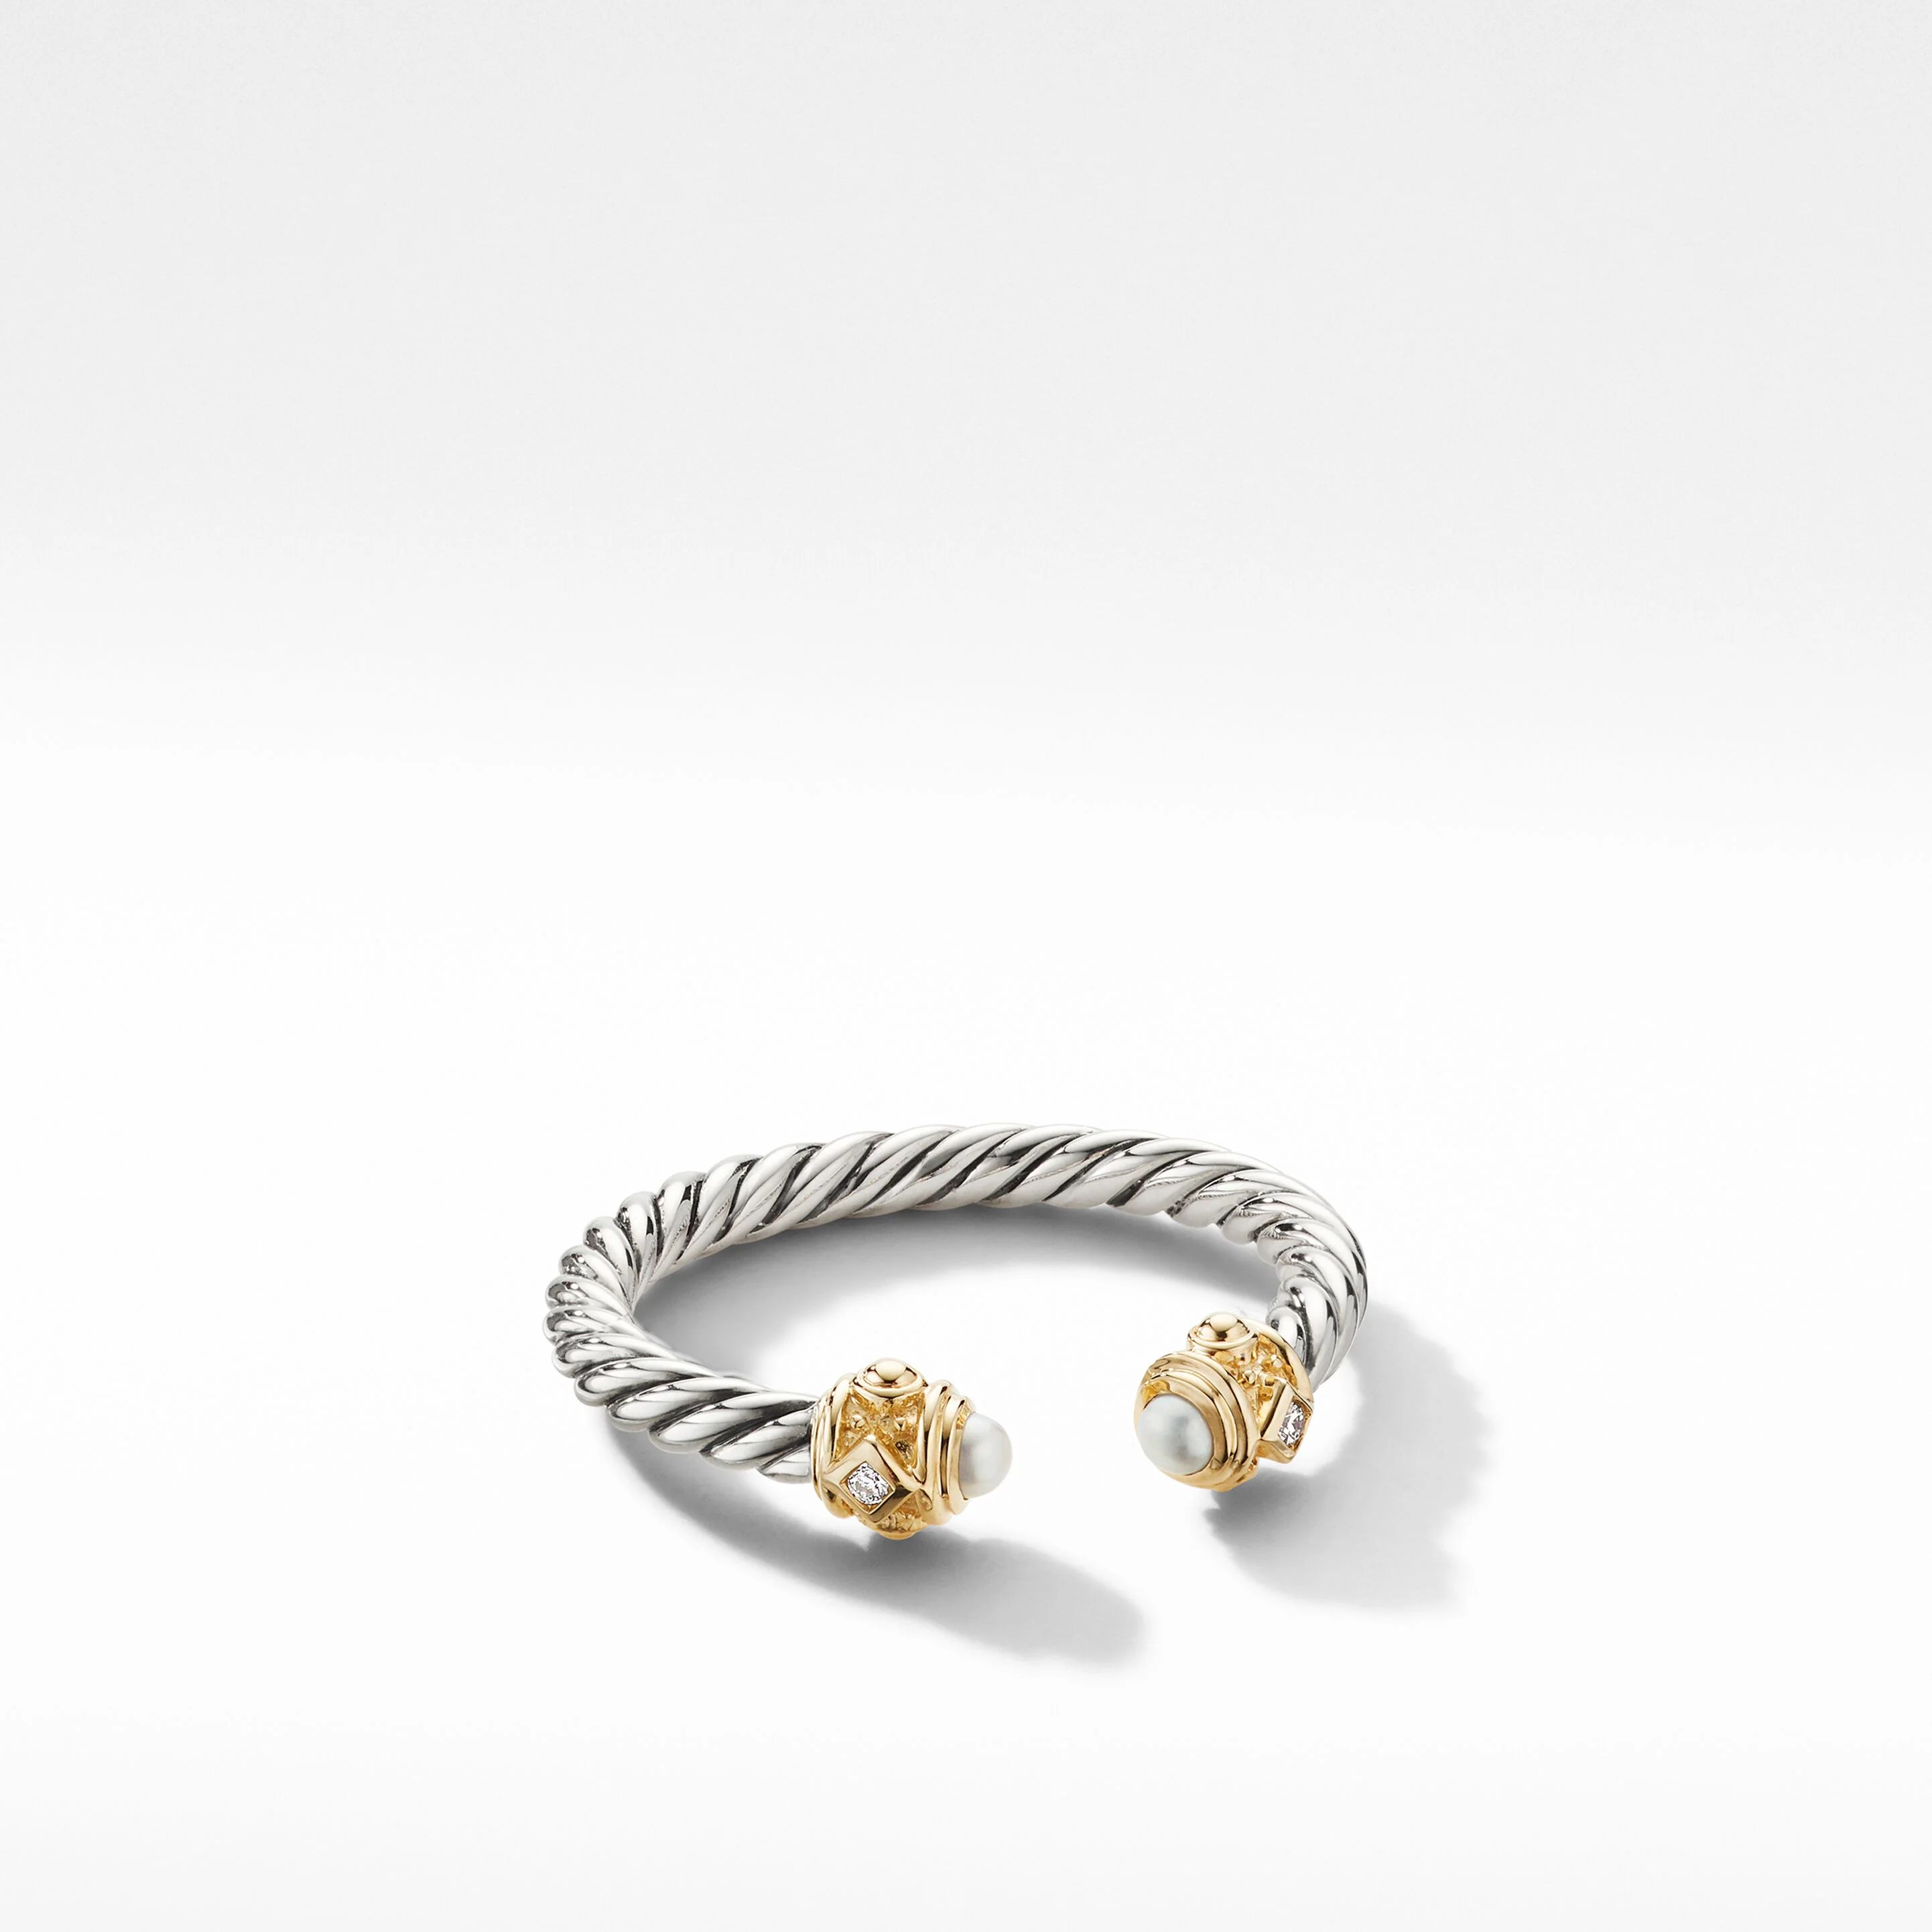 Renaissance Ring in Sterling Silver with Pearls, 14K Yellow Gold and Diamonds | David Yurman